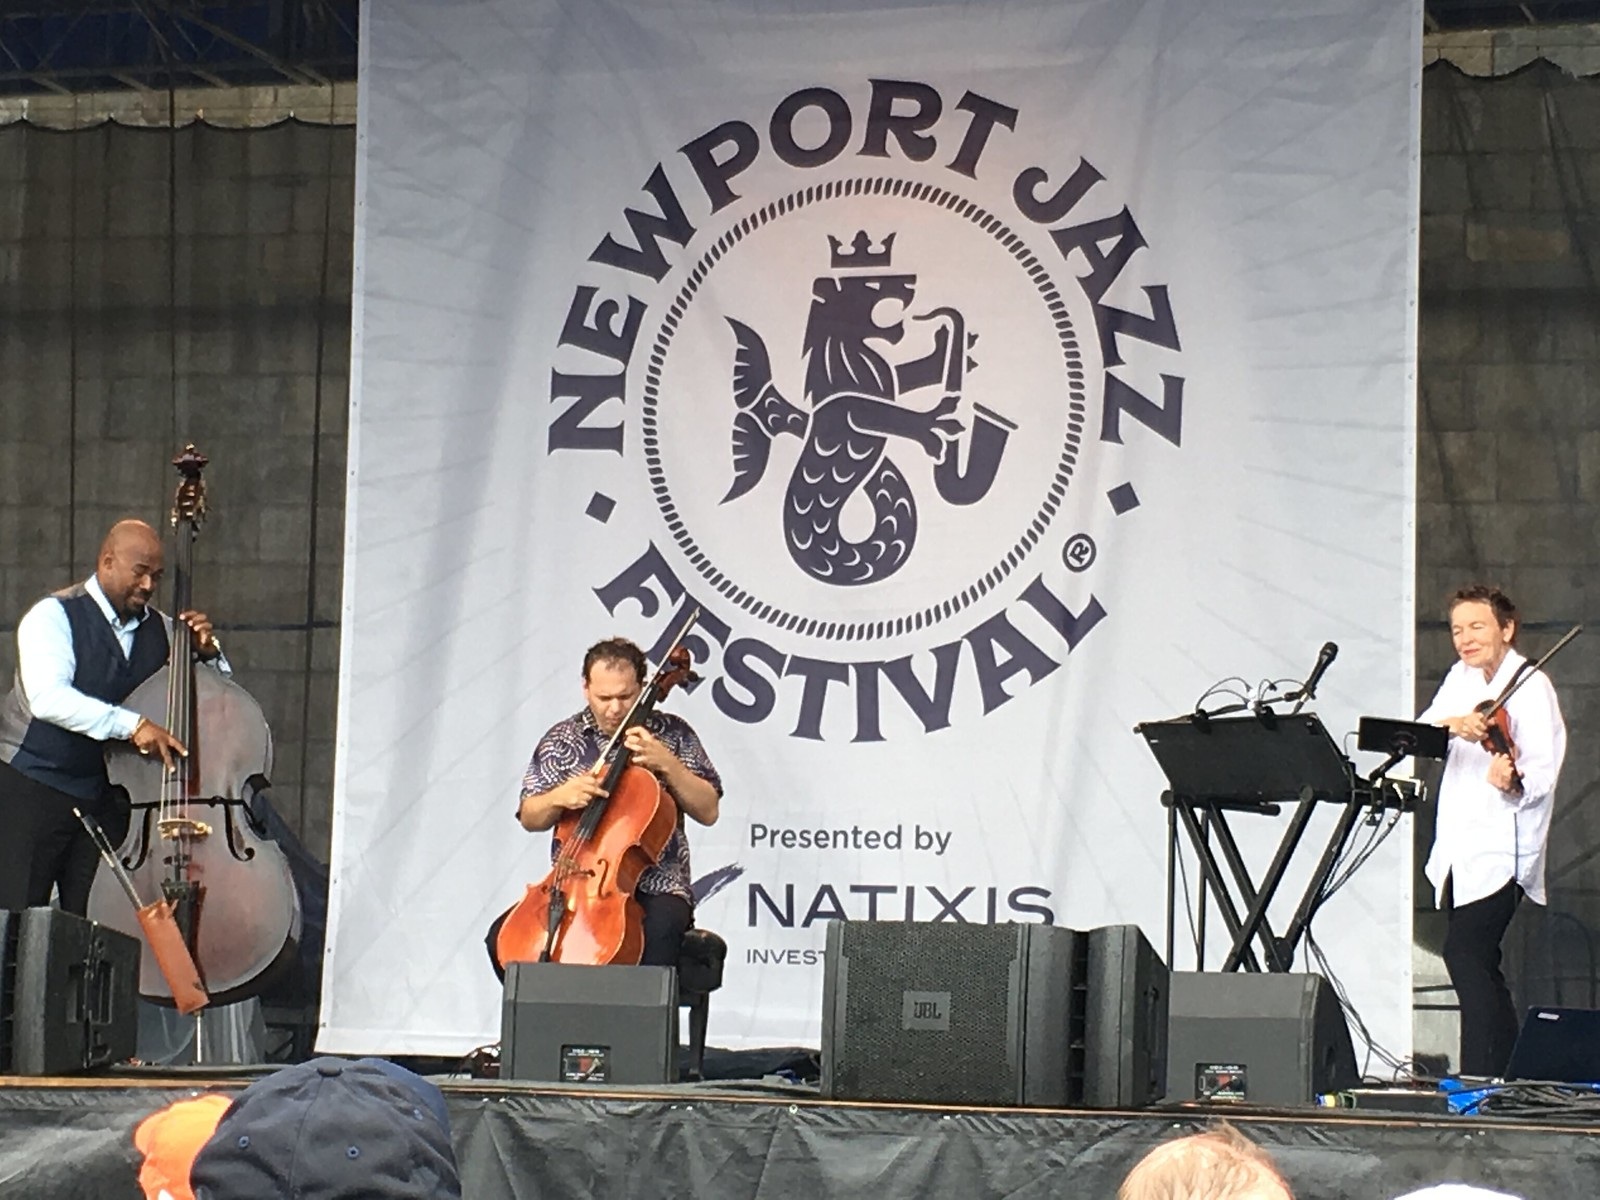  Rubin performs at Newport Jazz Festival 2018 with Laurie Anderson and Christian McBride. 